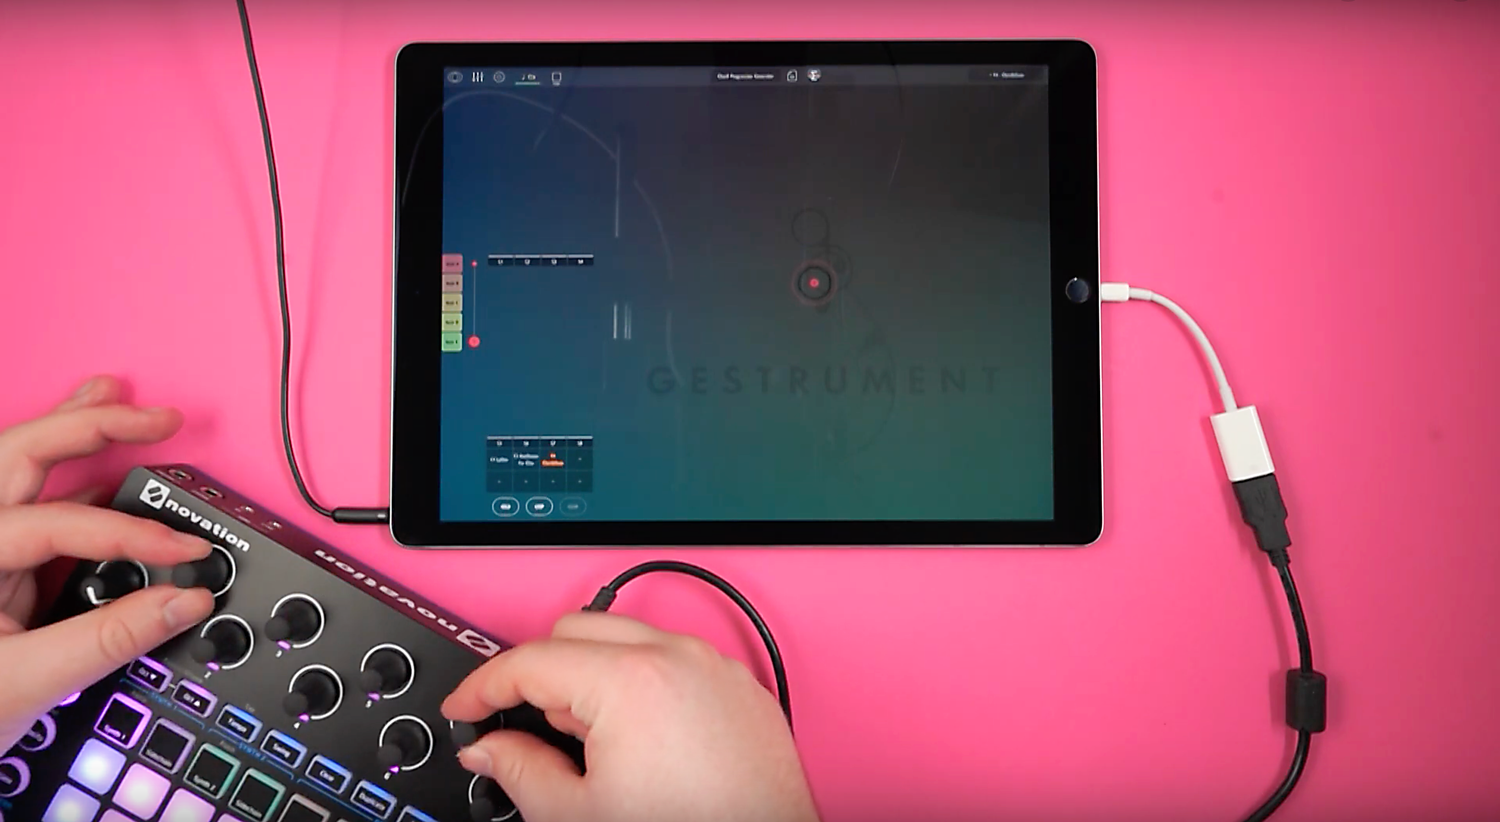 How To Use External Midi Hardware As Input To Ipad For Controlling Gestrument Pro